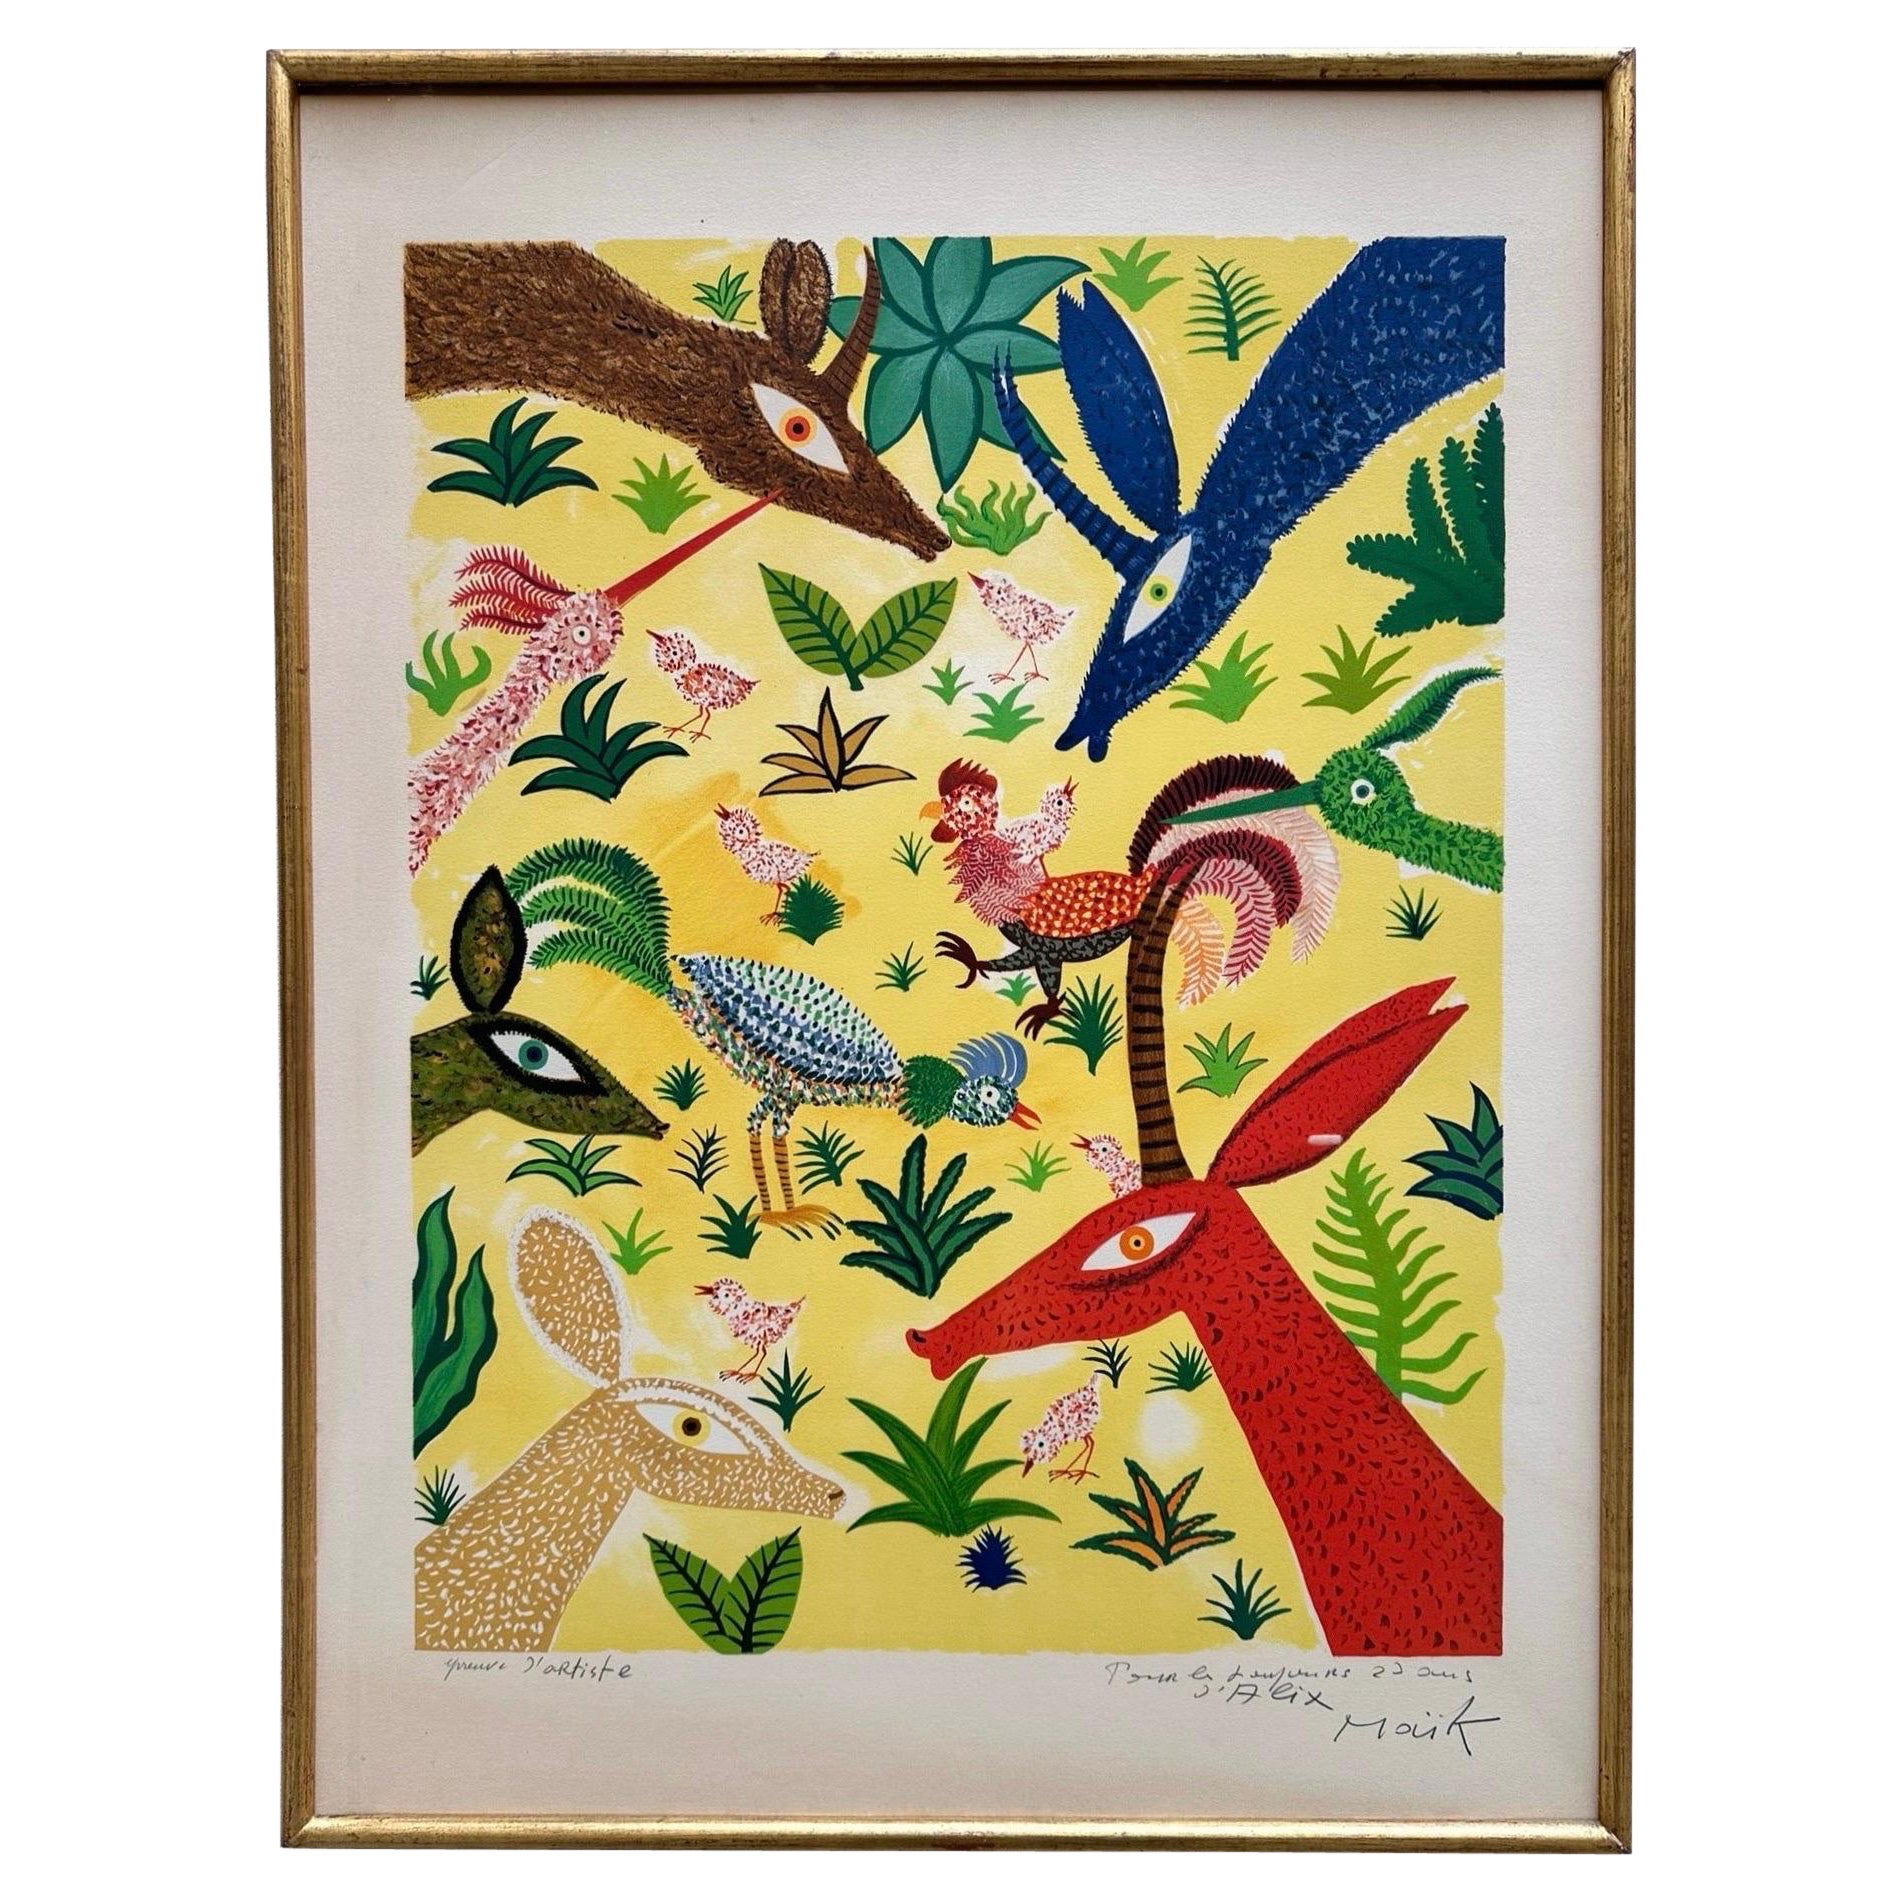 Henri Hecht MAÏK, Lithograph, Rare Signed Artist’s Proof from early 70s For Sale